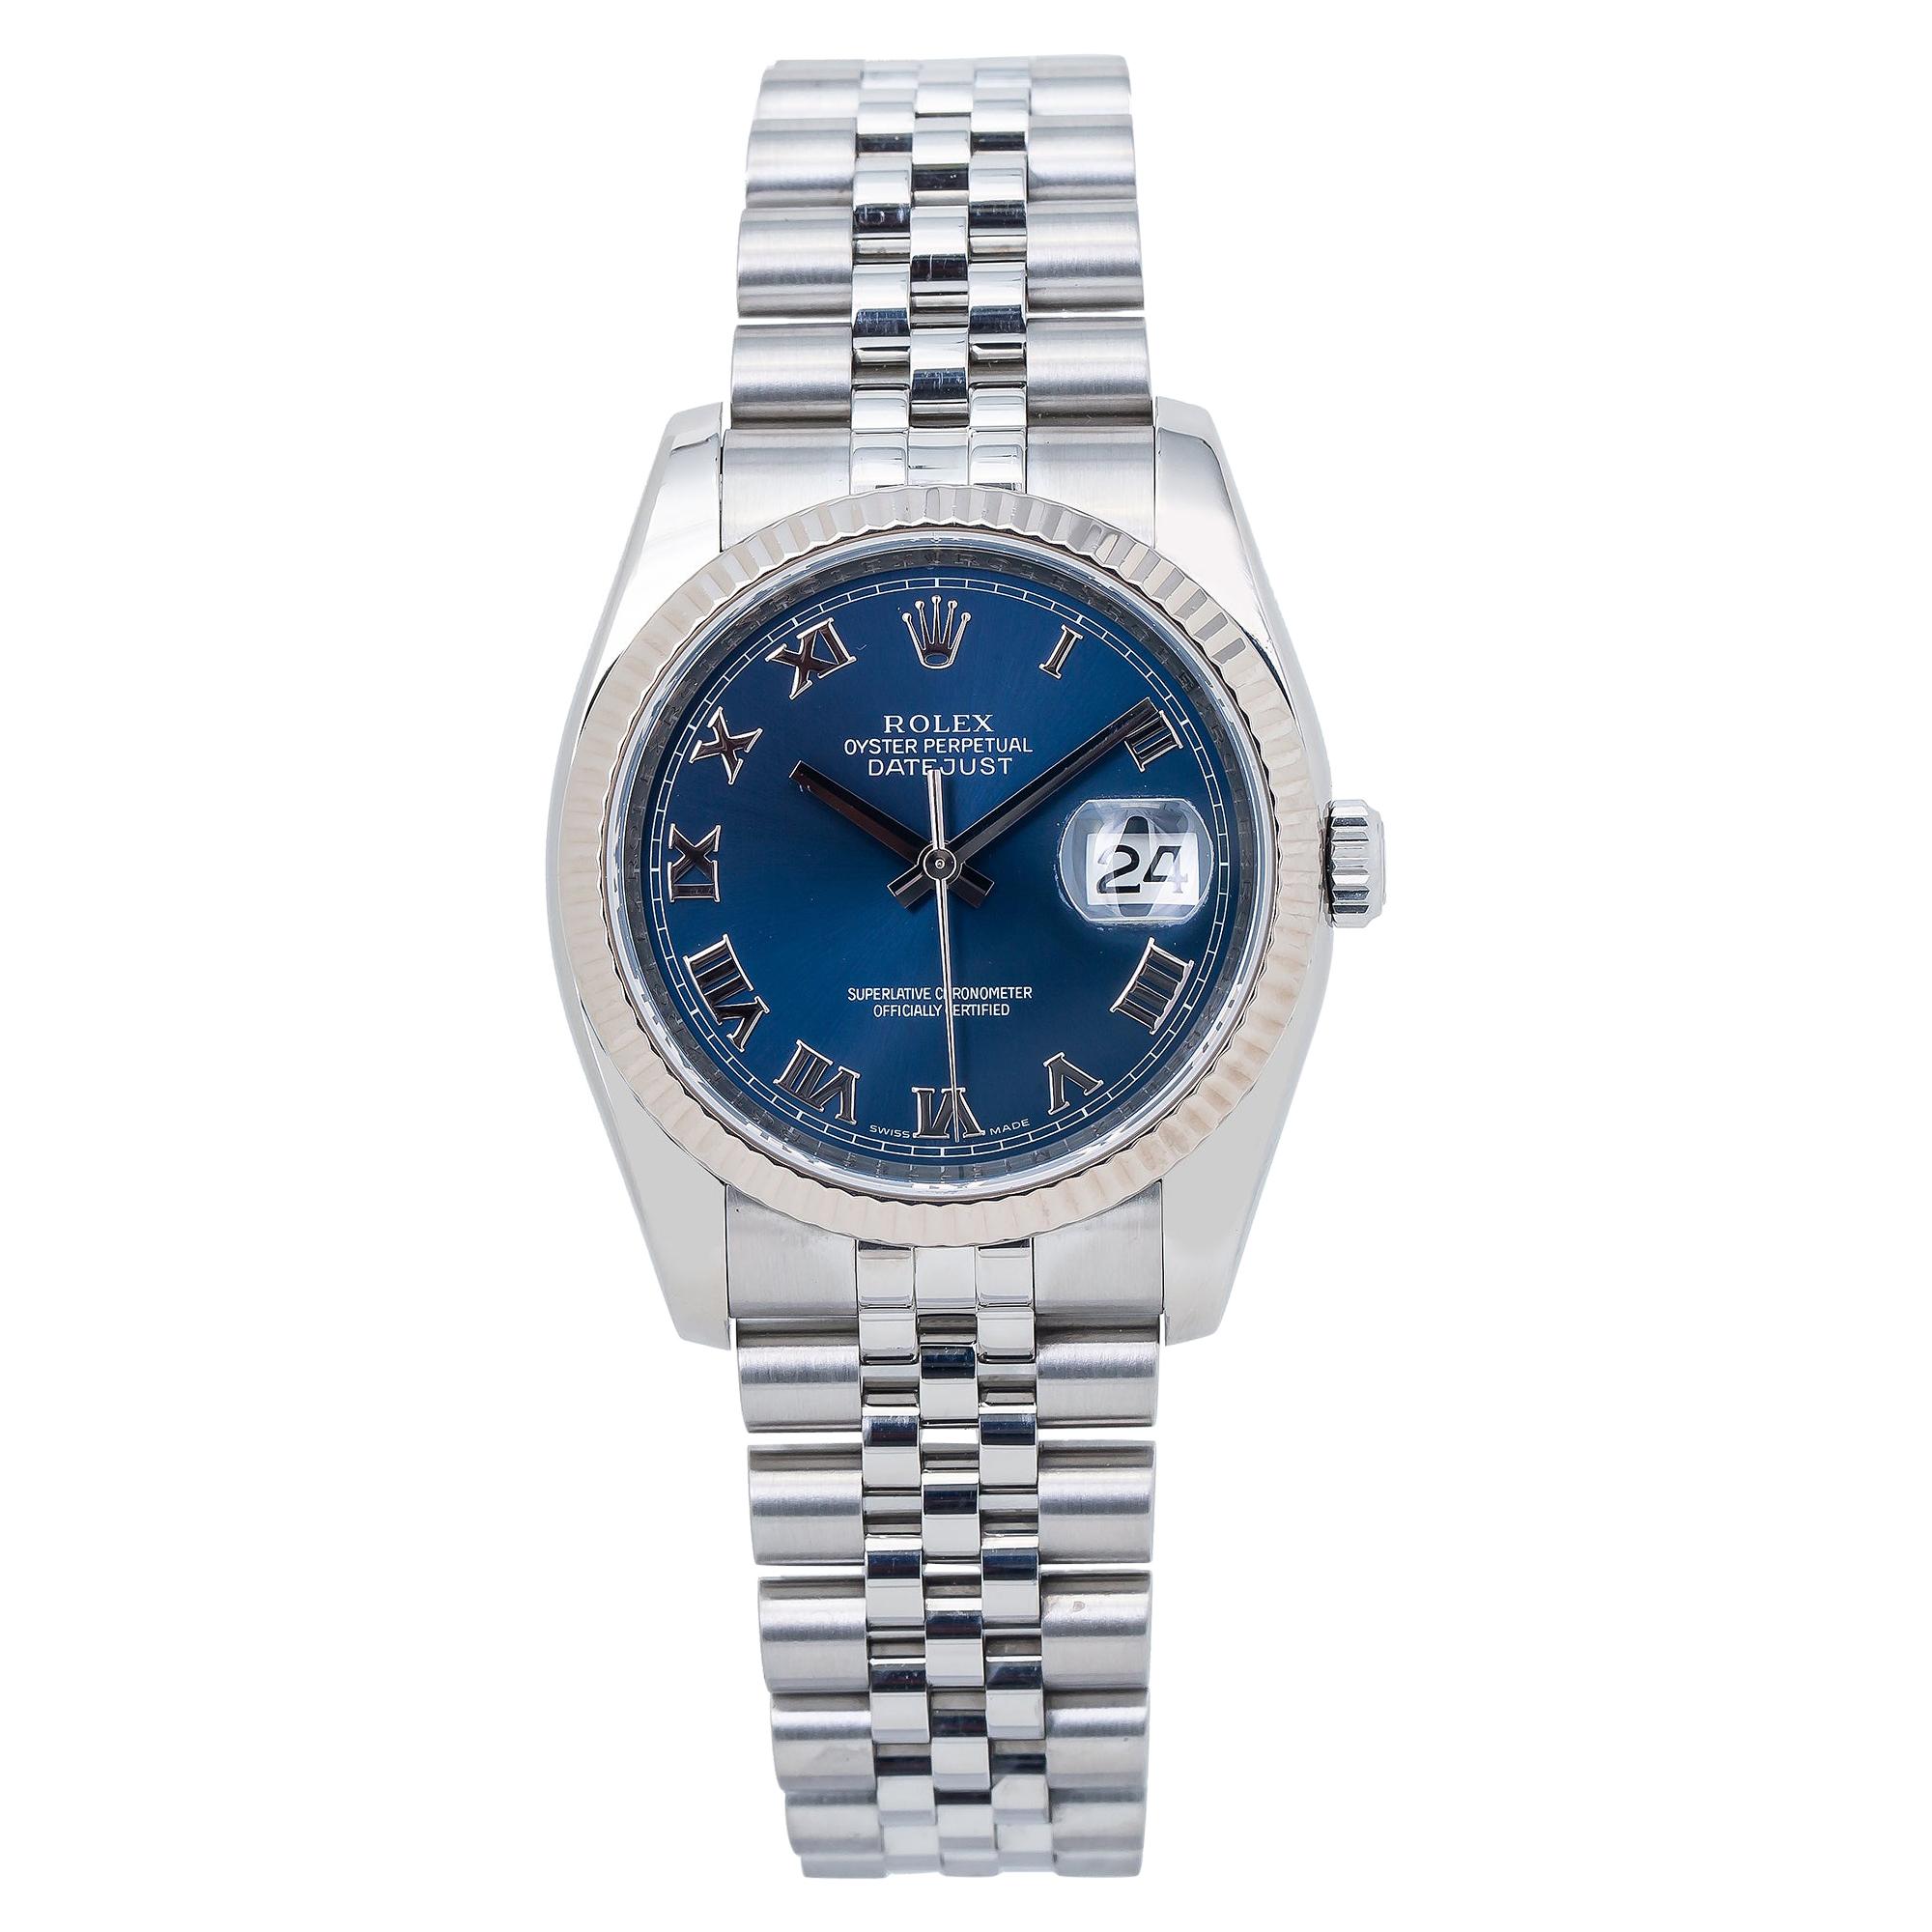 Rolex Datejust 116234 Jubilee Unisex Automatic Watch Blue Dial Stainless